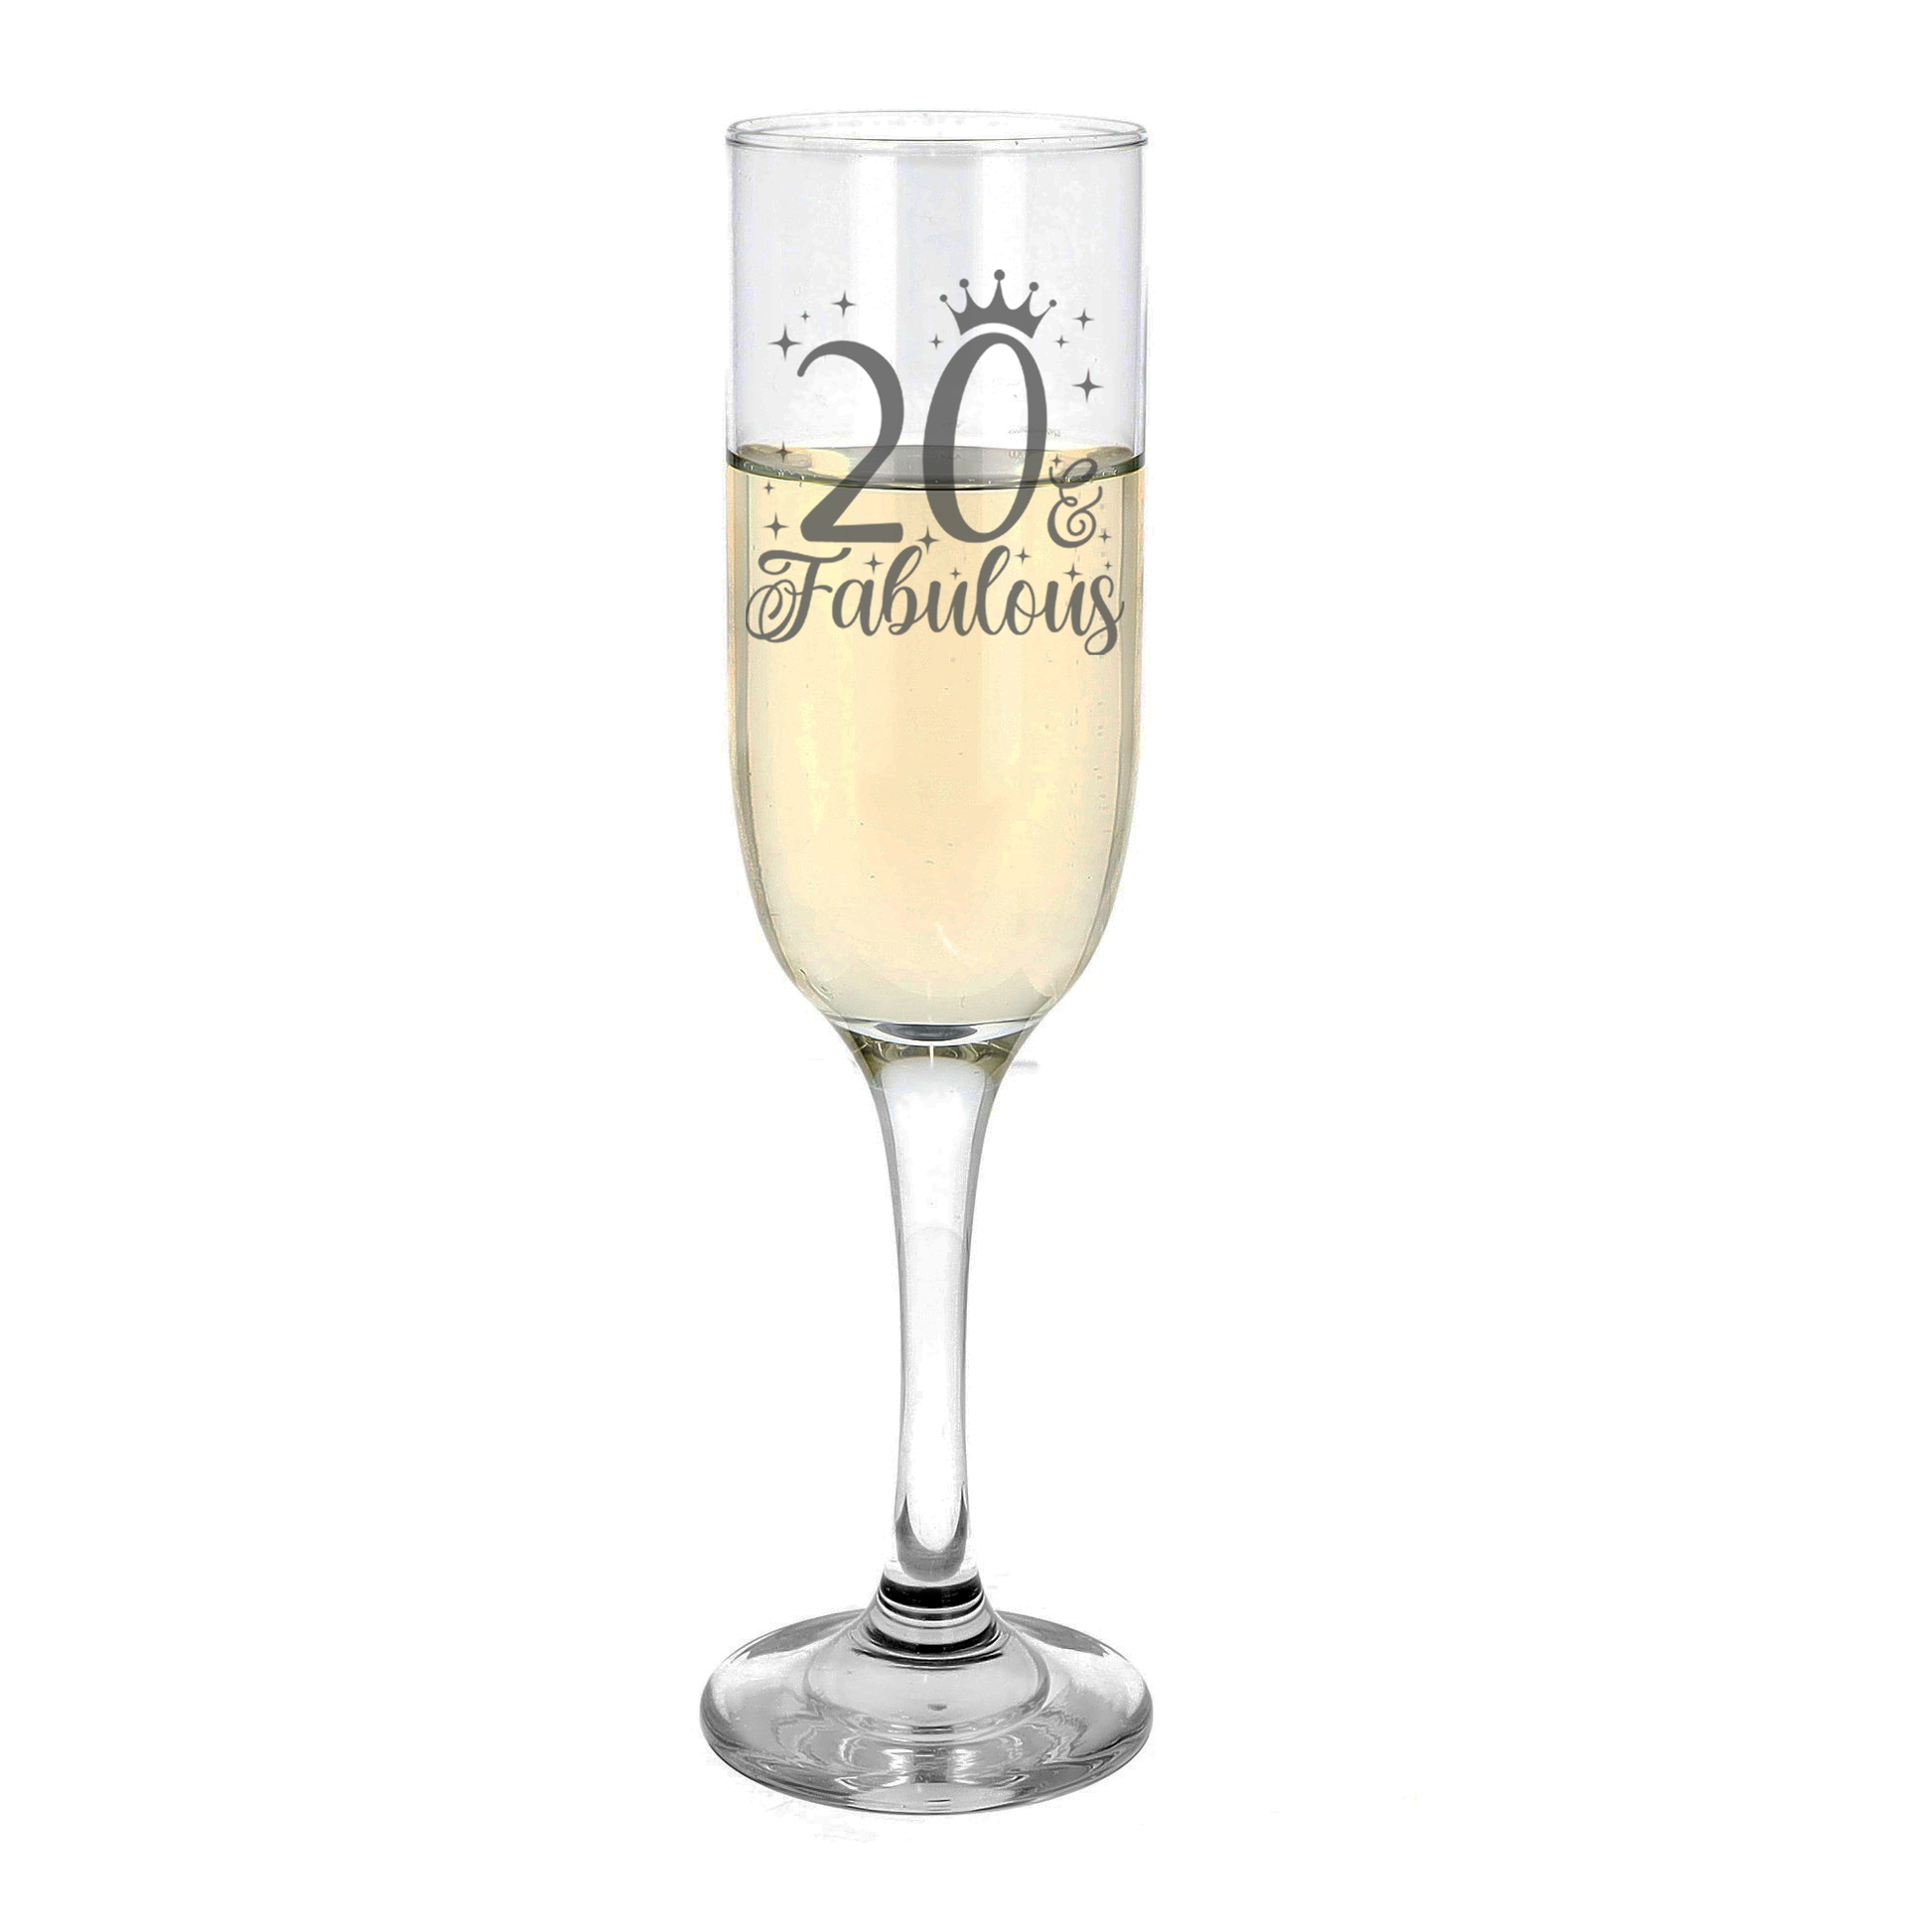 20 & Fabulous Engraved Champagne Glass and/or Coaster Set  - Always Looking Good -   